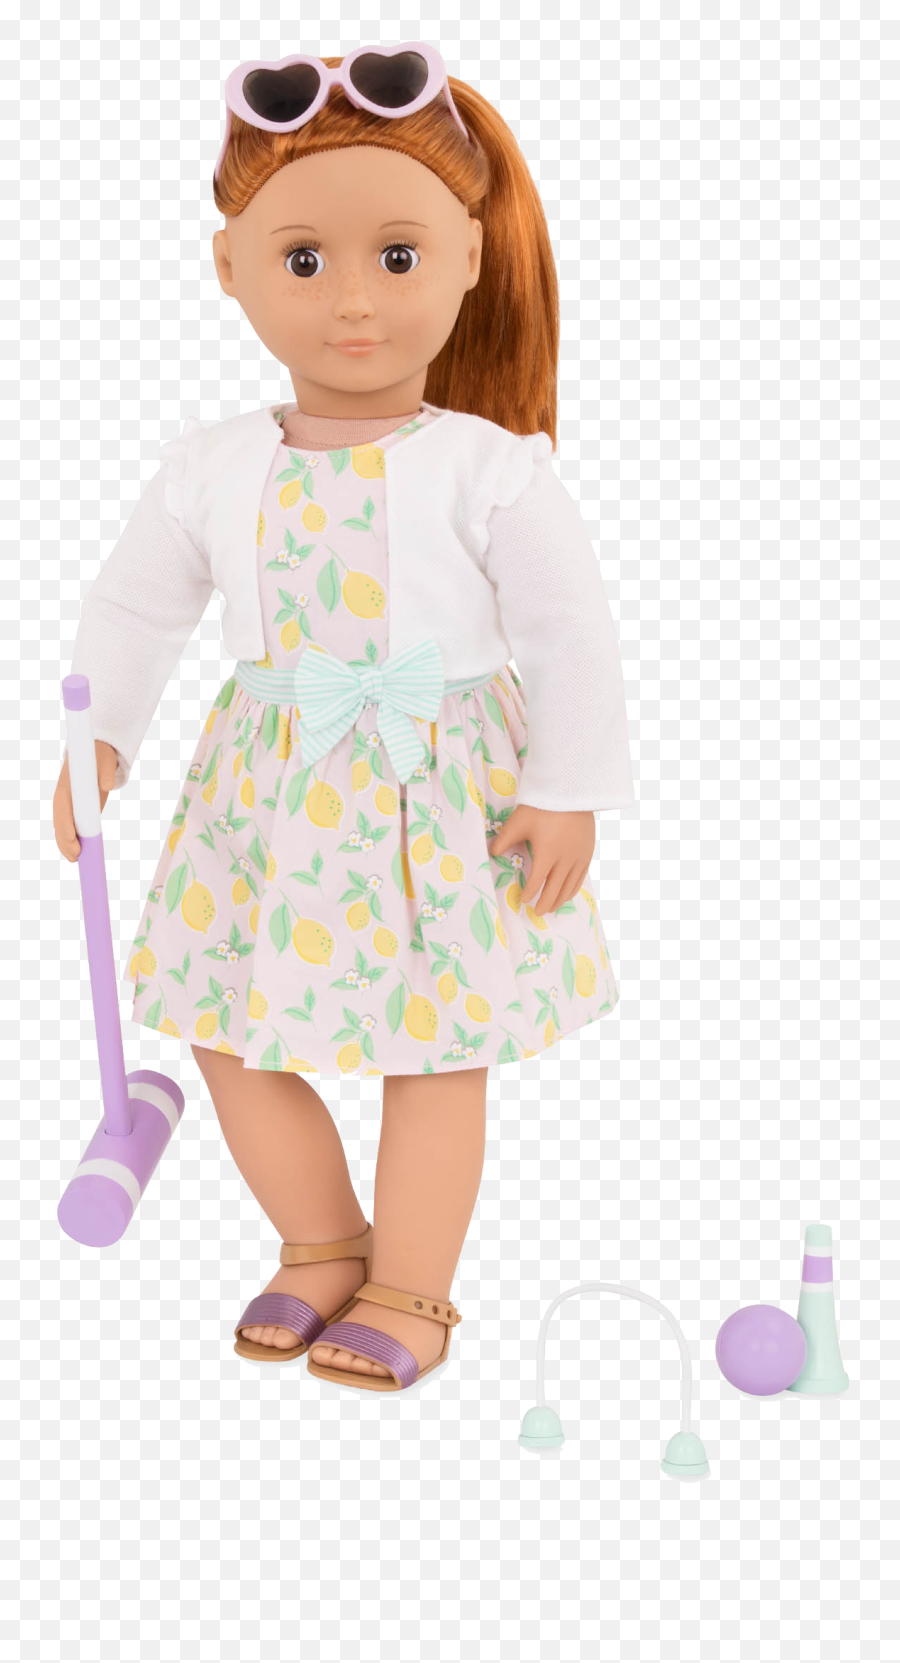 Our Generation Deluxe Outfit Croquet Play Clothing U0026 Shoes - Happy Emoji,American Girl Doll Emojis